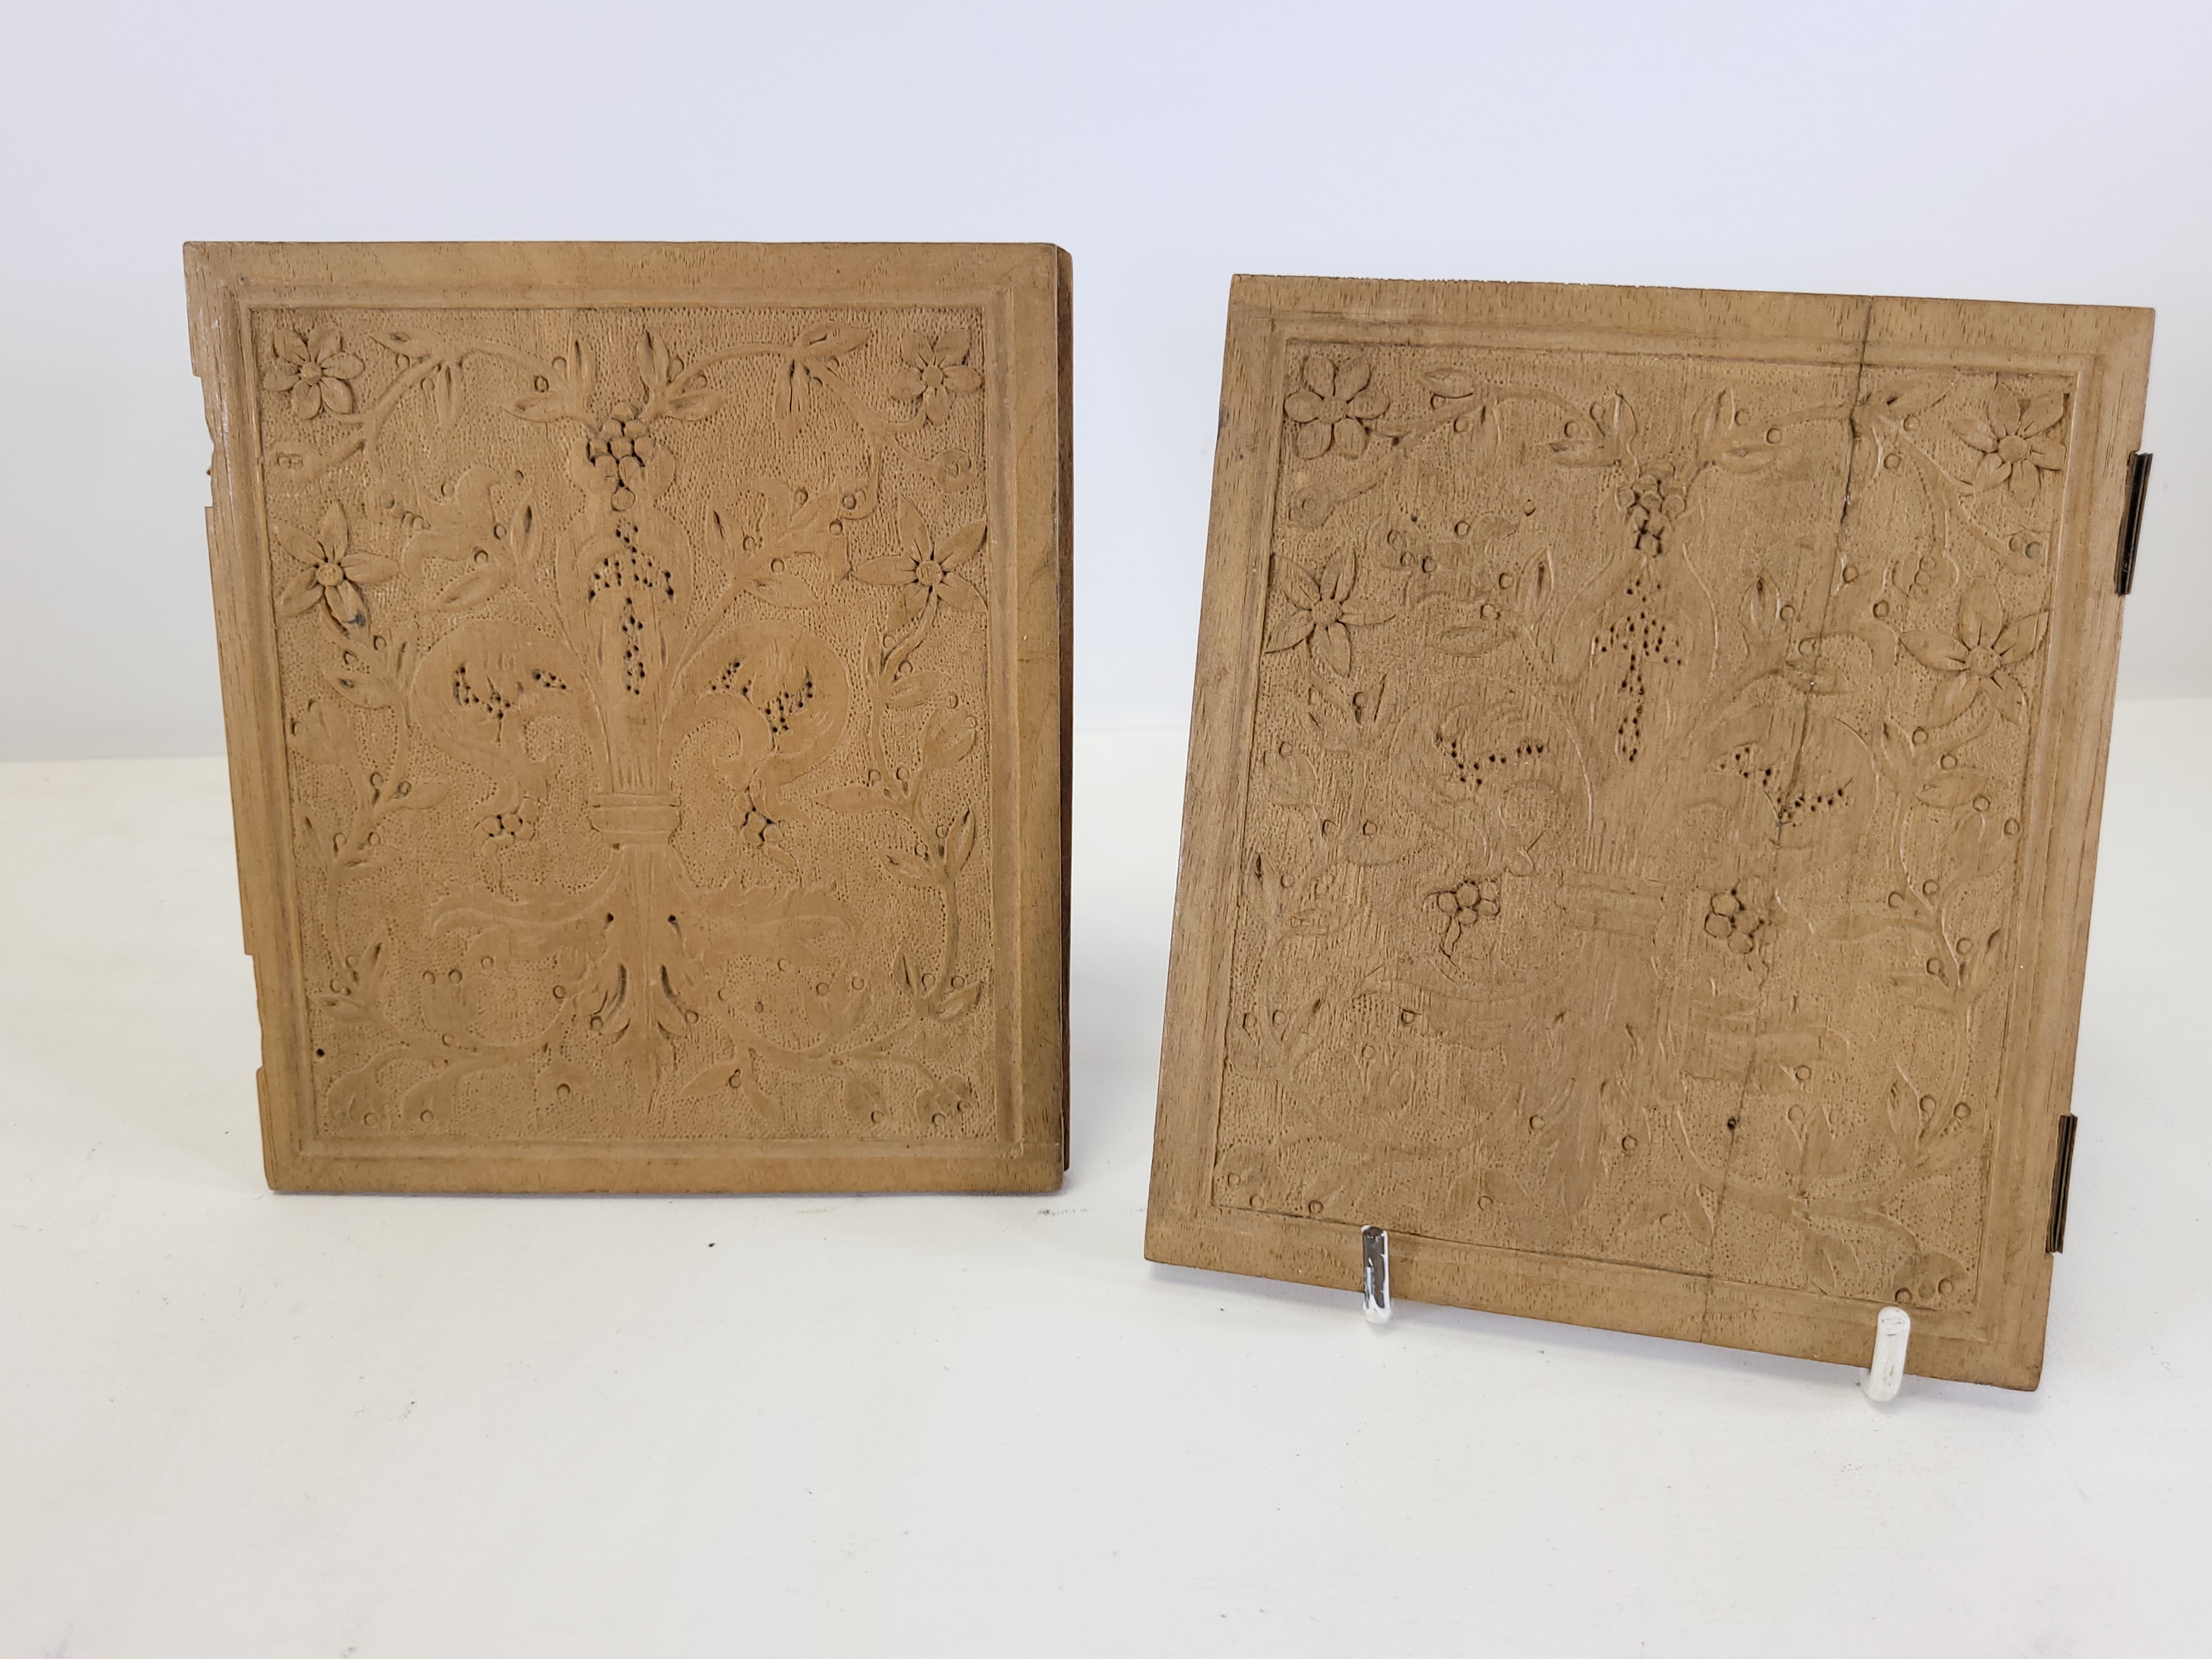 A pair of late 19th or early 20th Century Black Forest carved wooden book covers with a design of - Image 5 of 6